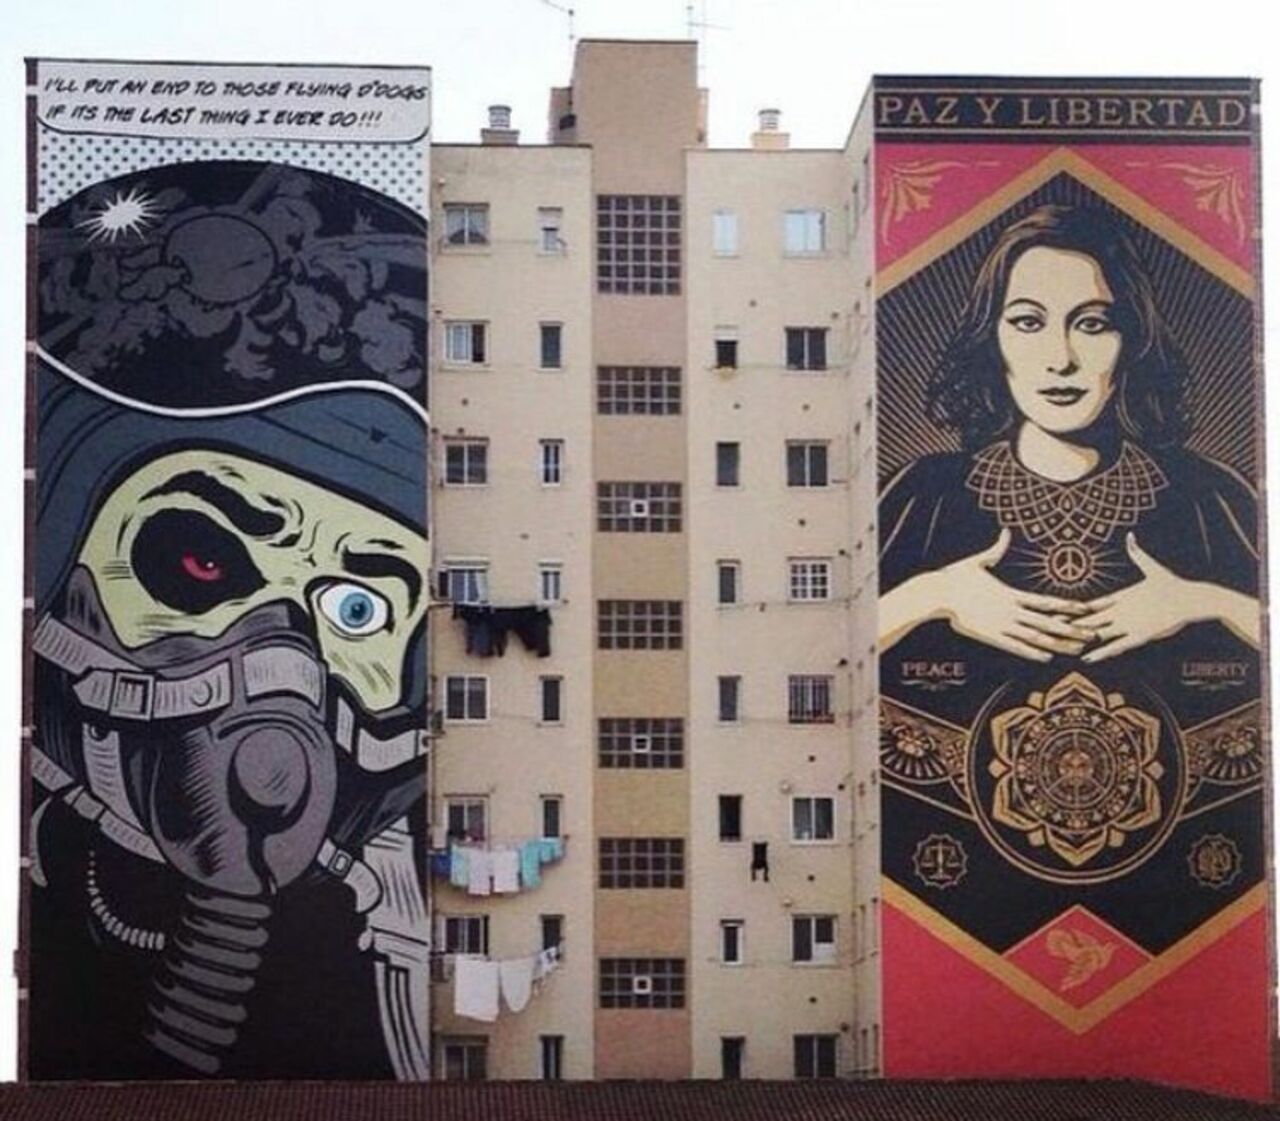 Murals by D*Face and OBEY side by side in Malaga, Spain #streetart #mural #graffiti #art https://t.co/IOE1jGhrPg